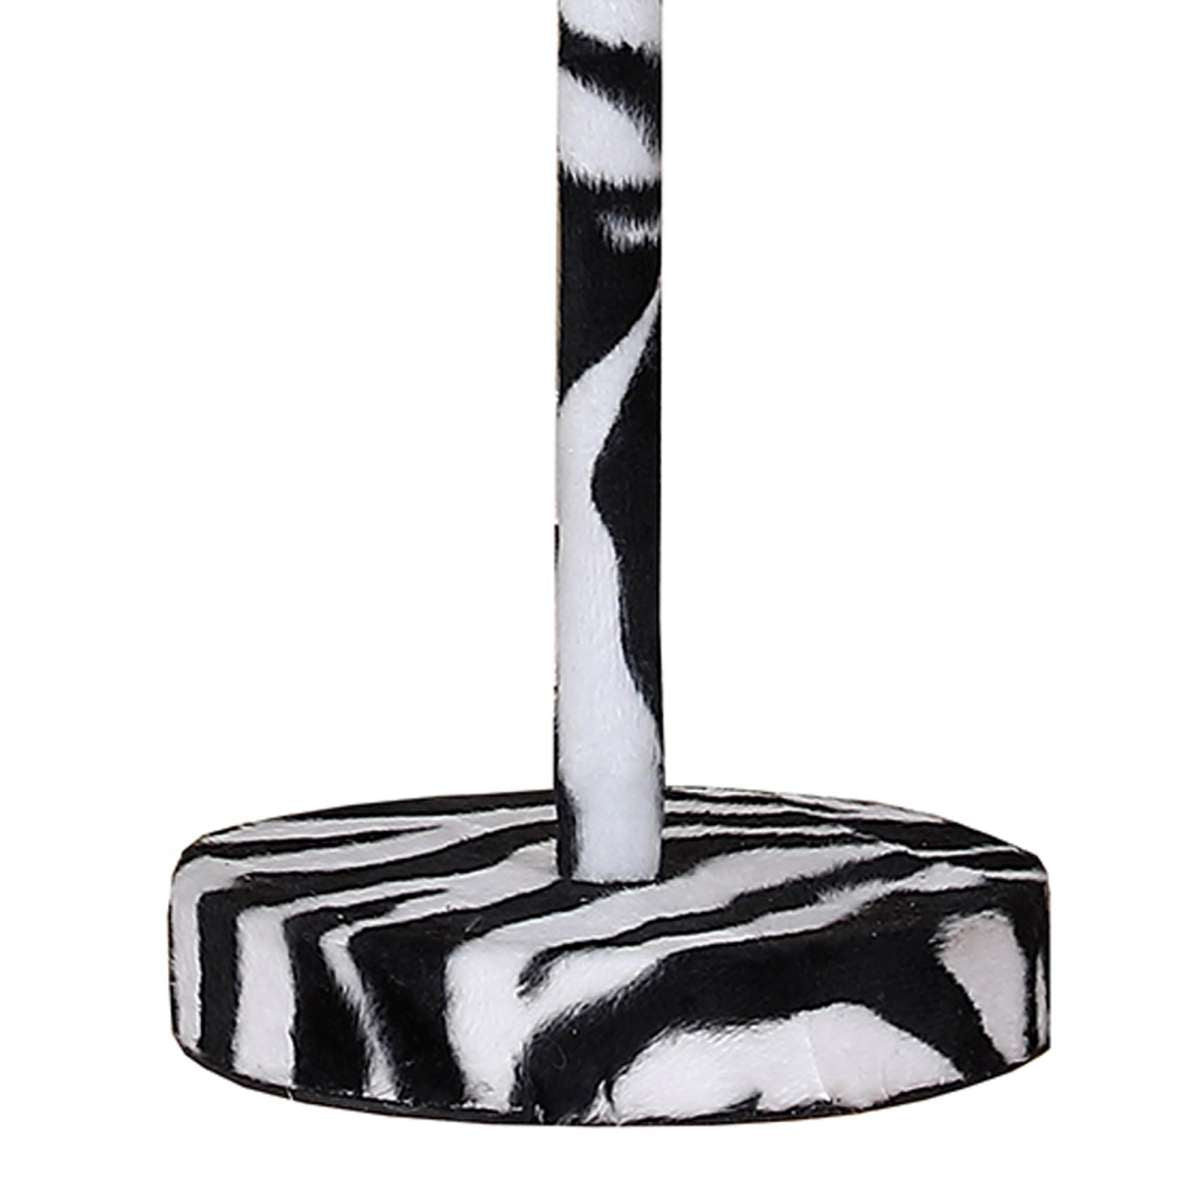 Fabric Wrapped Table Lamp With Animal Print, White And Black By Benzara